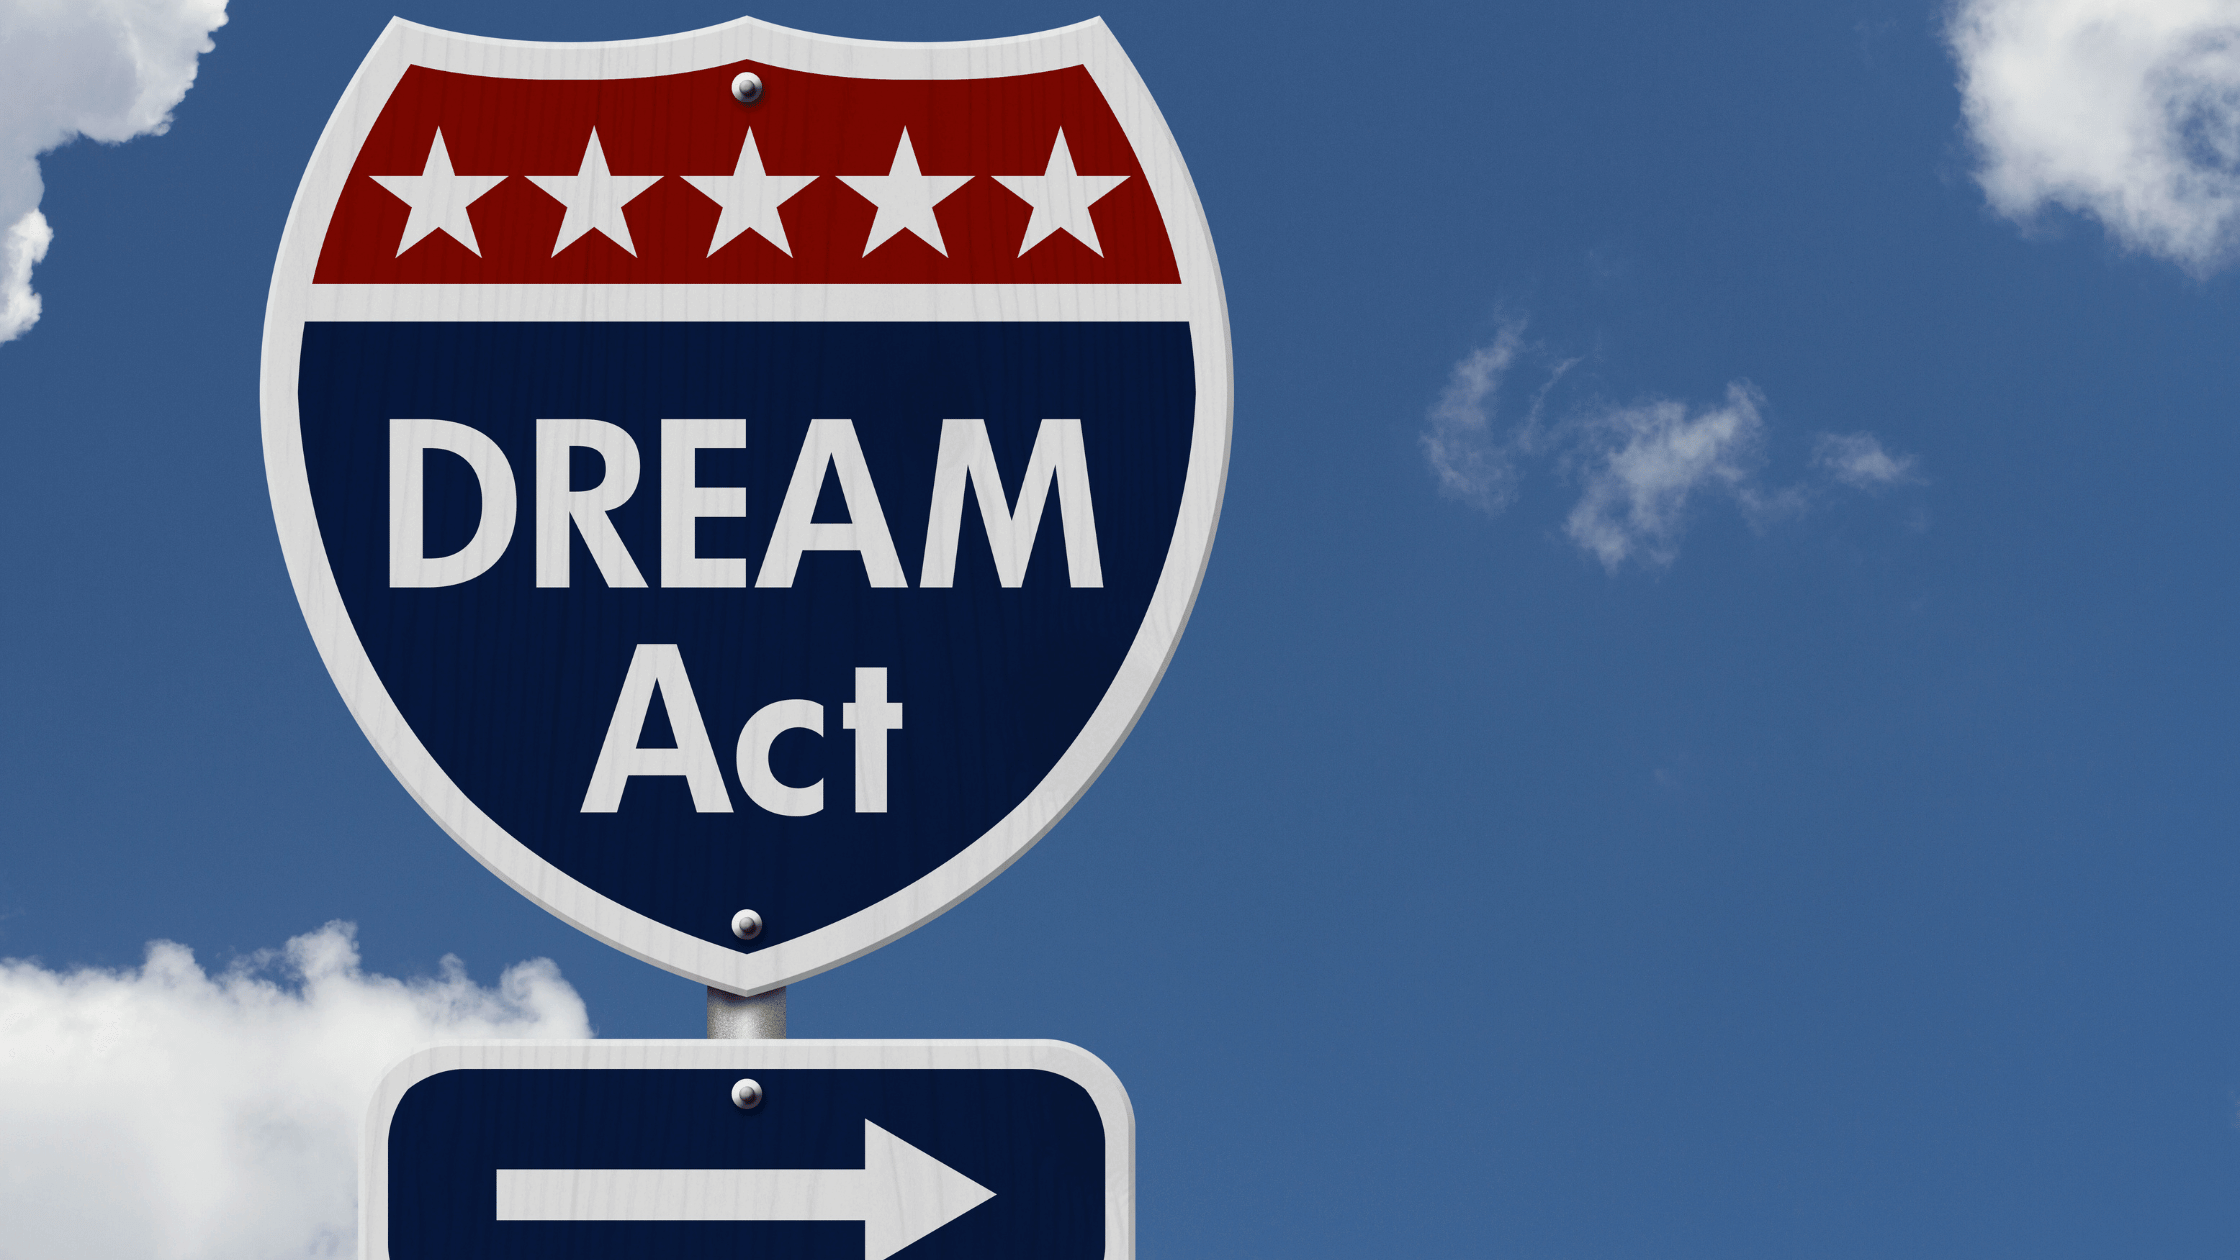 The dream is back - Dream Act Sign